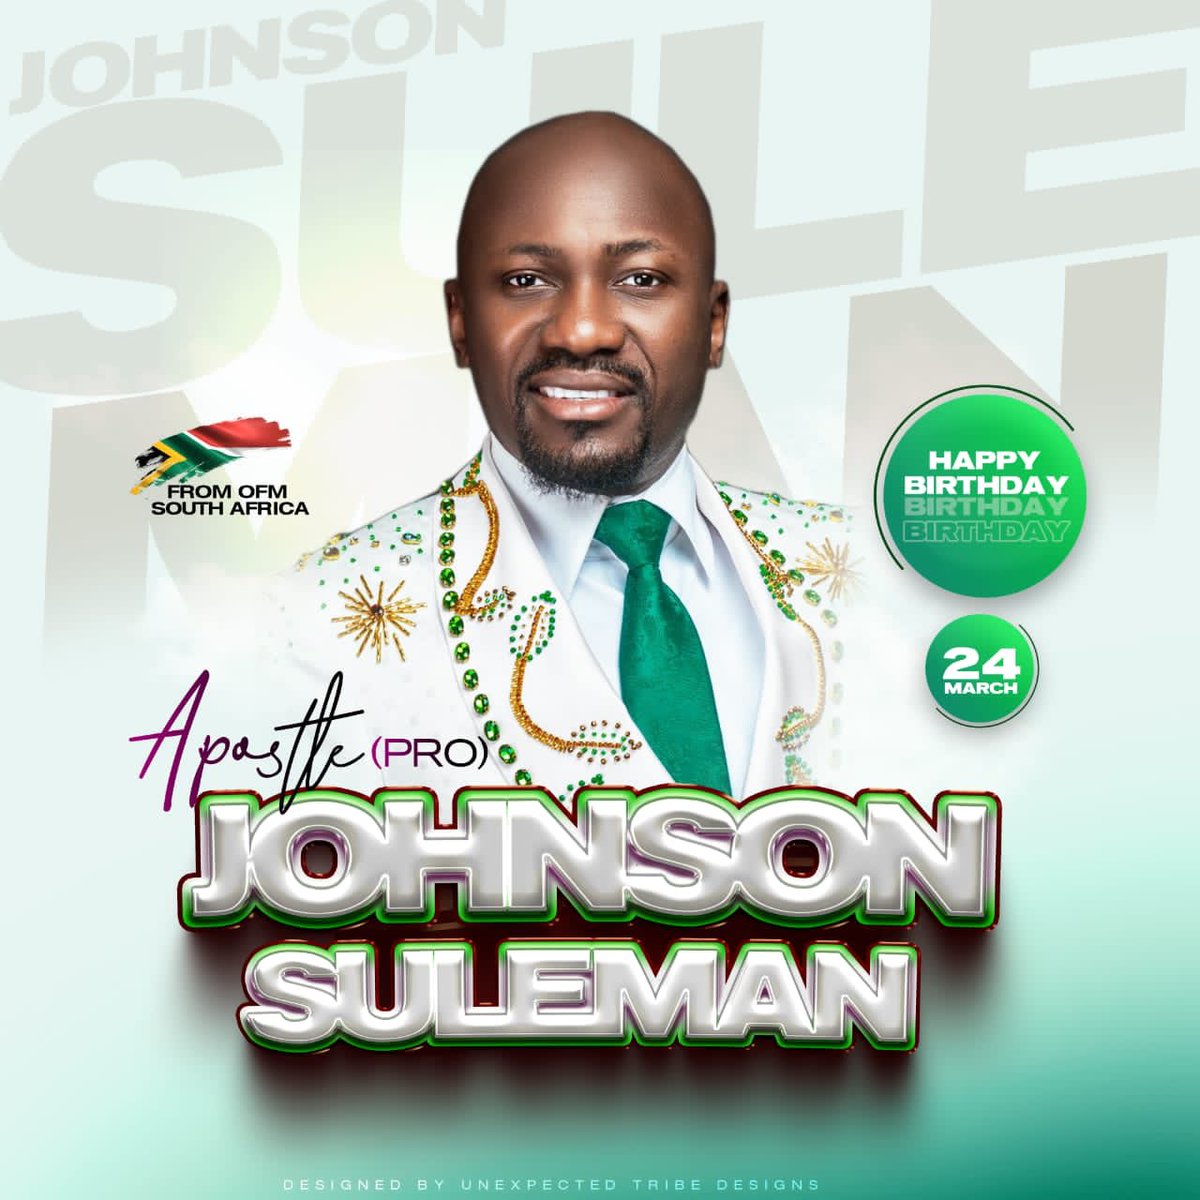 Happy Birthday His Excellency, The Restoration Apostle Johnson Suleman. Daddy you are the best! We love you sir!

#March24 #AJS2023
#TRA2023
#PaulAdogamhe
#ChristabelAdogamhe
#CelebrationTV
#OFMJHB